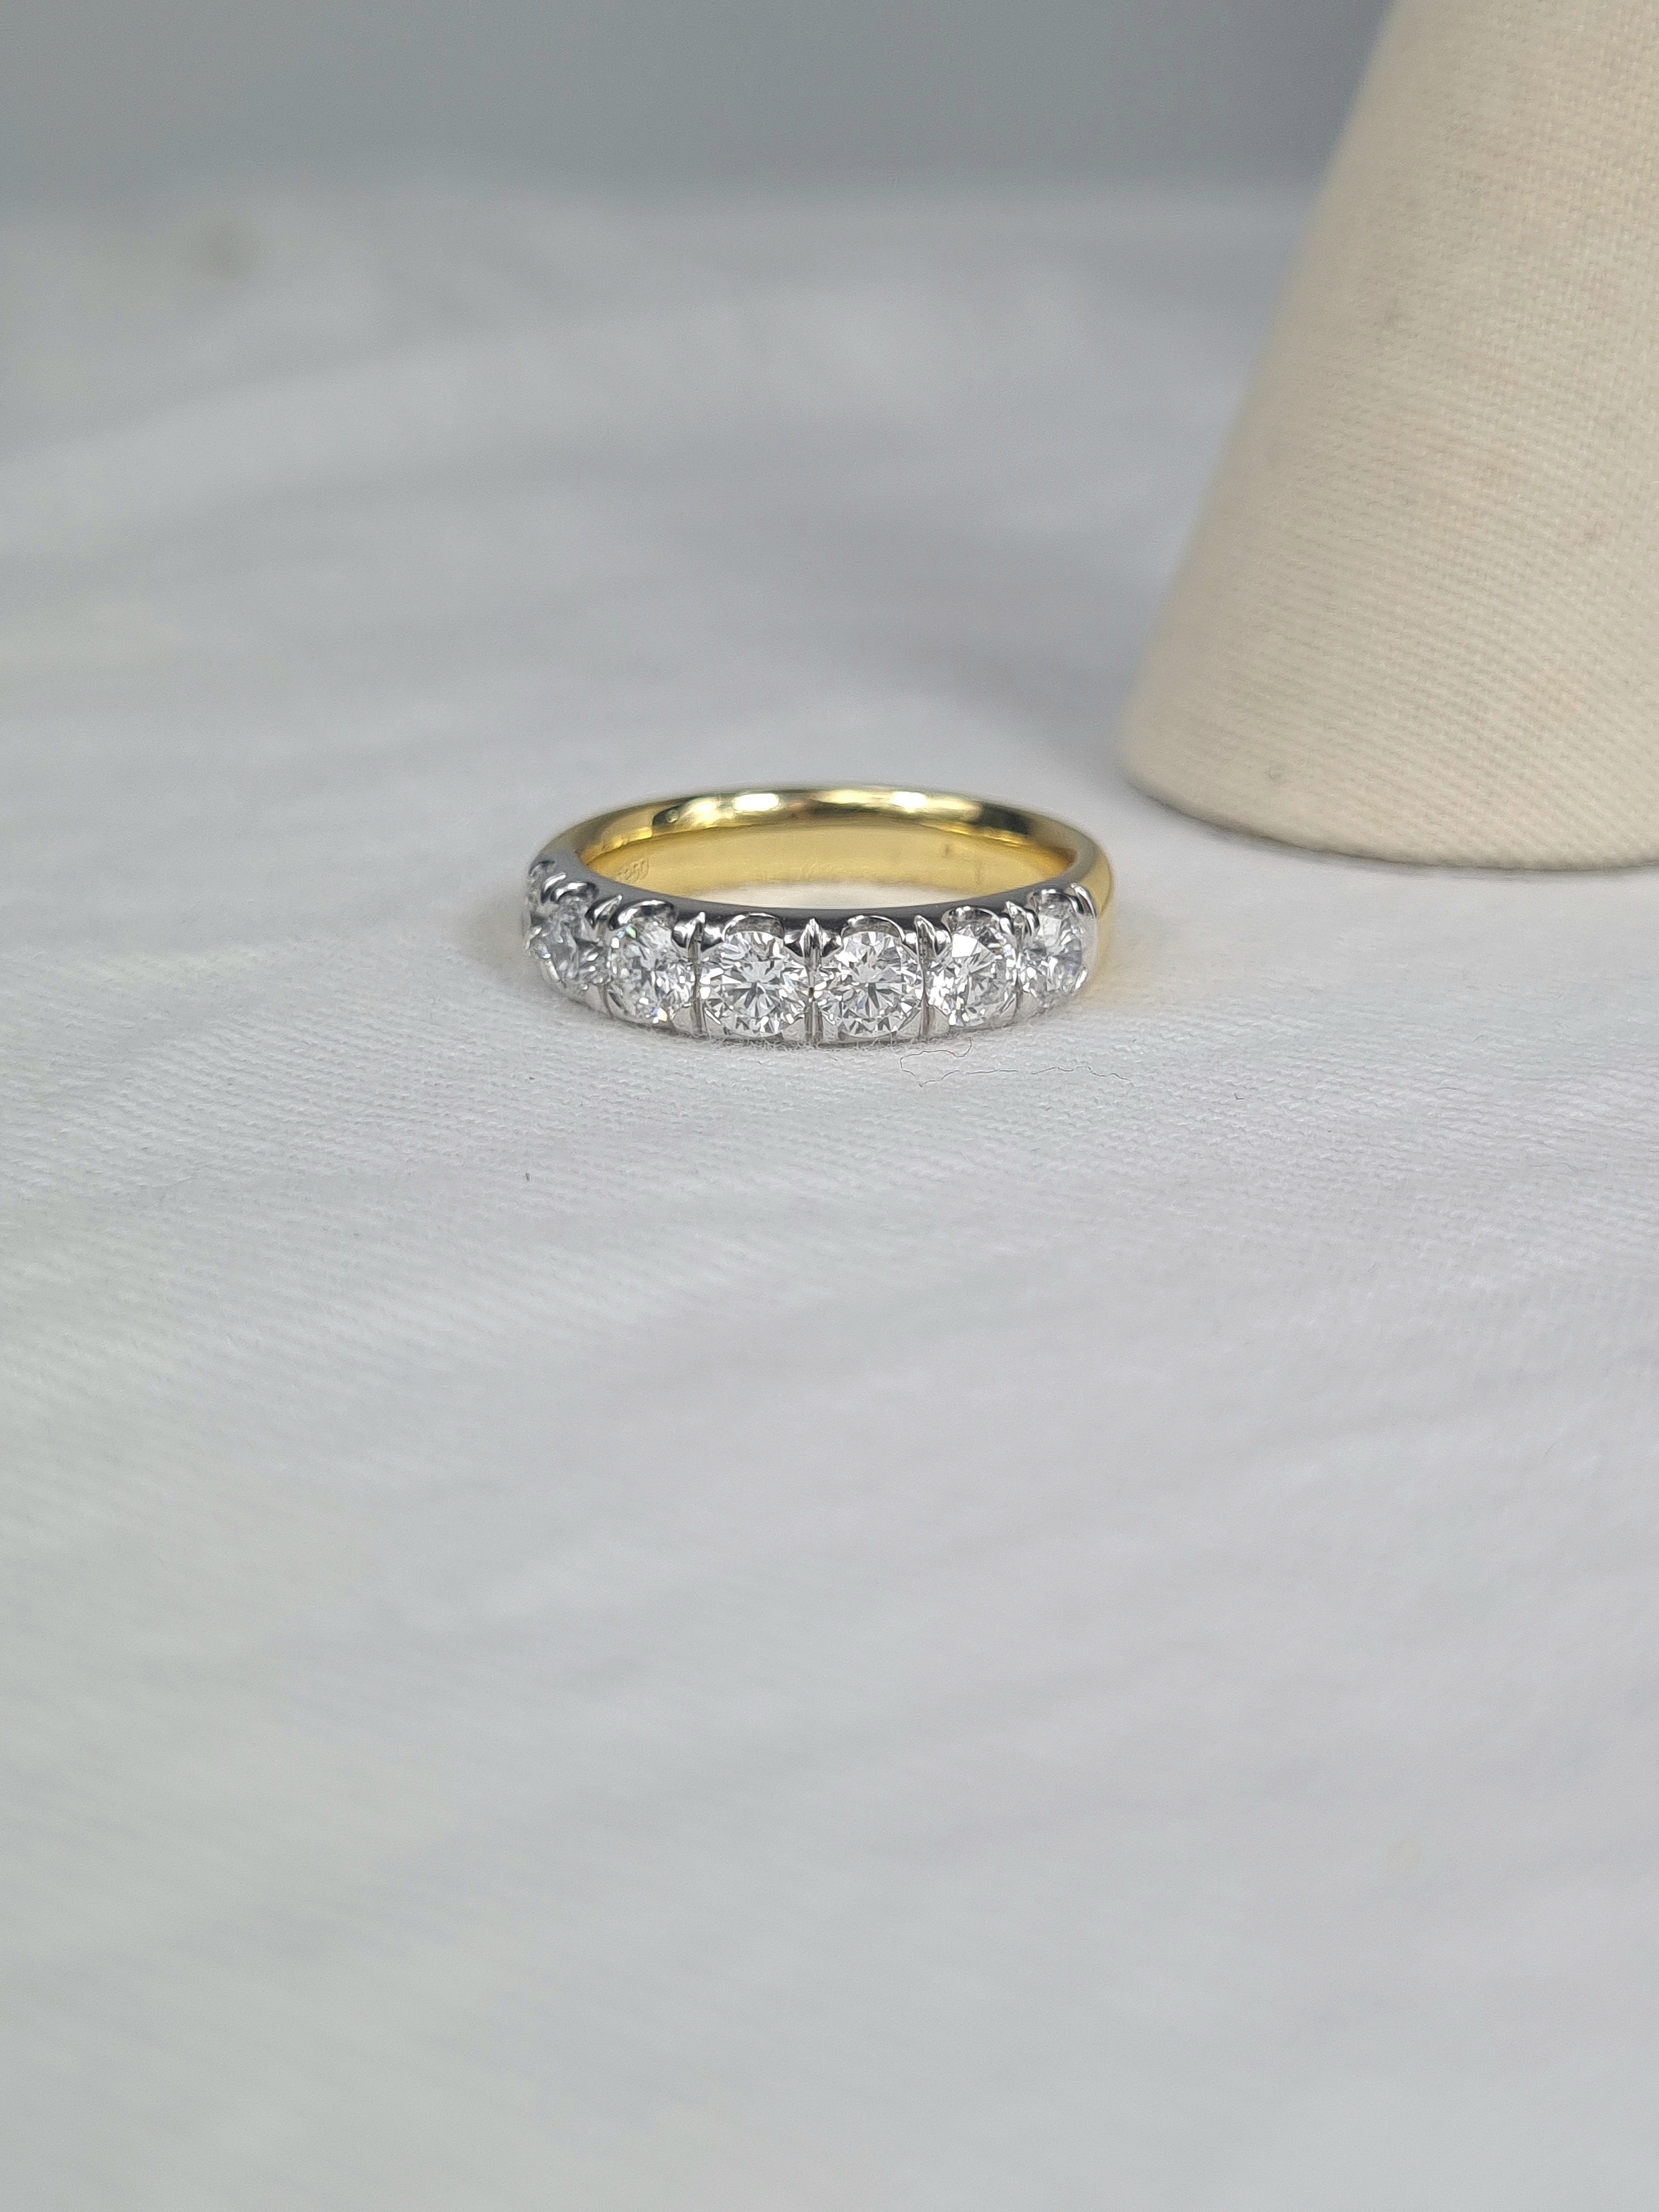 Platinum and 18ct Yellow Gold 'Ultimate Eternity' ring, 1.36 carats total.